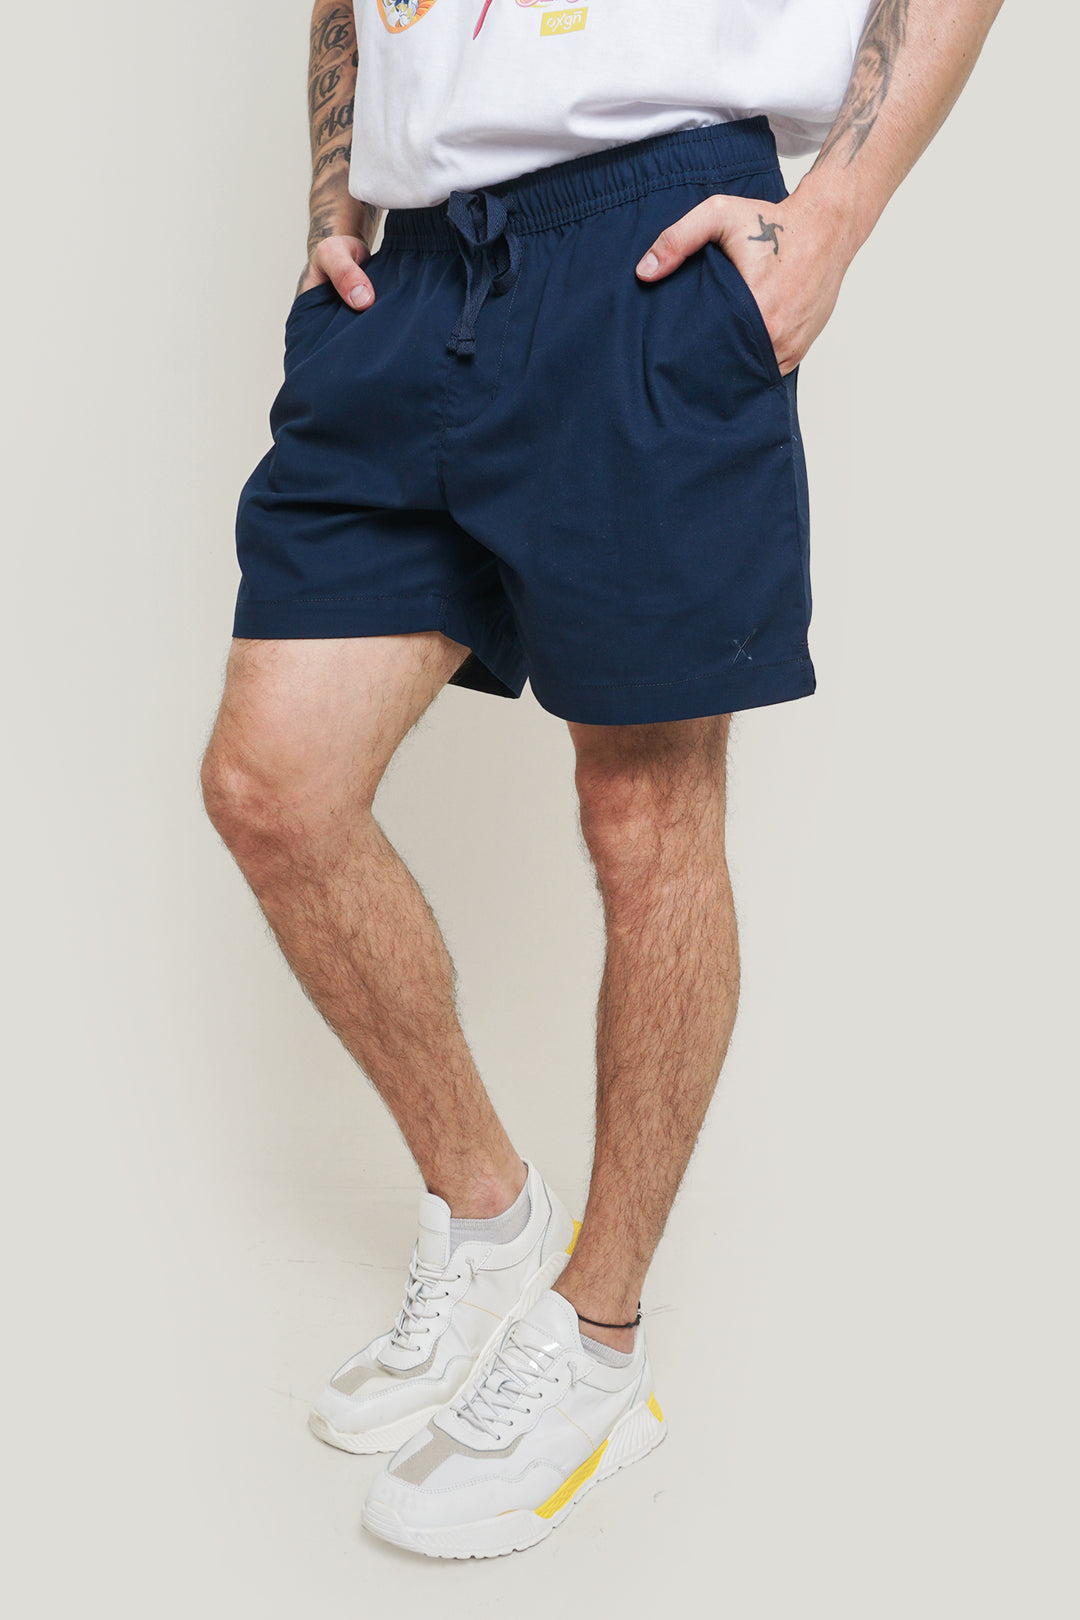 – OXGN Shorts Woven Embroidered